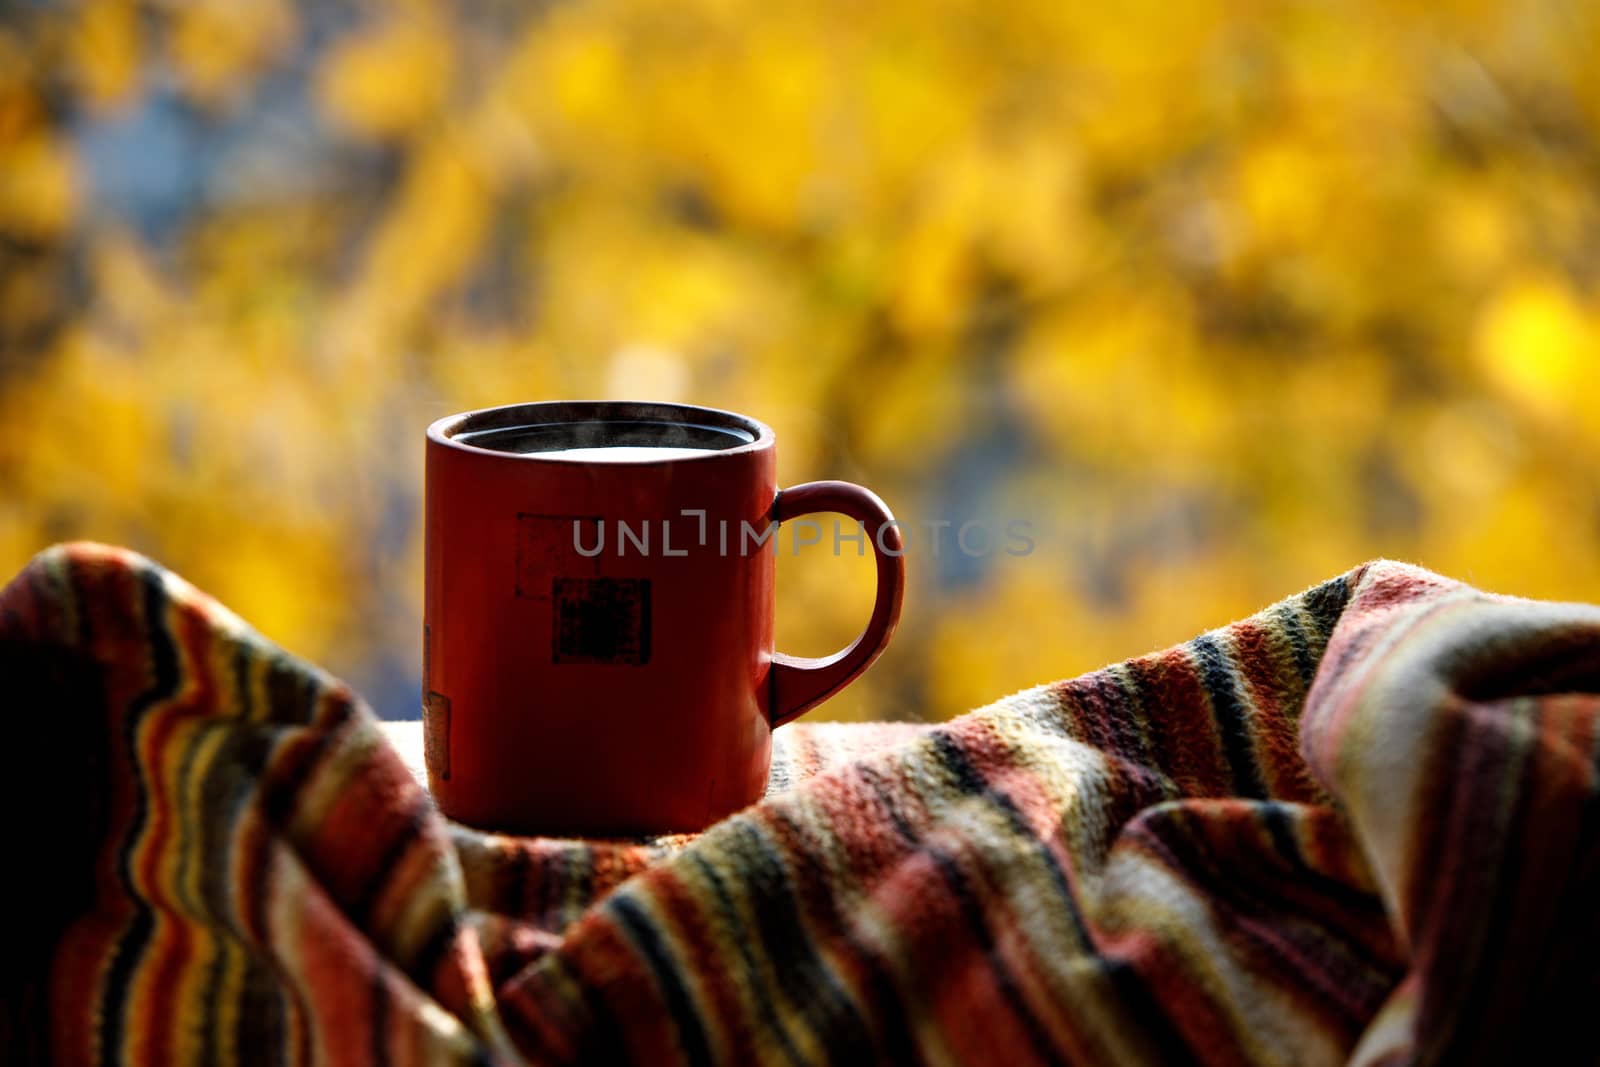 Red coffee cup over autumn background